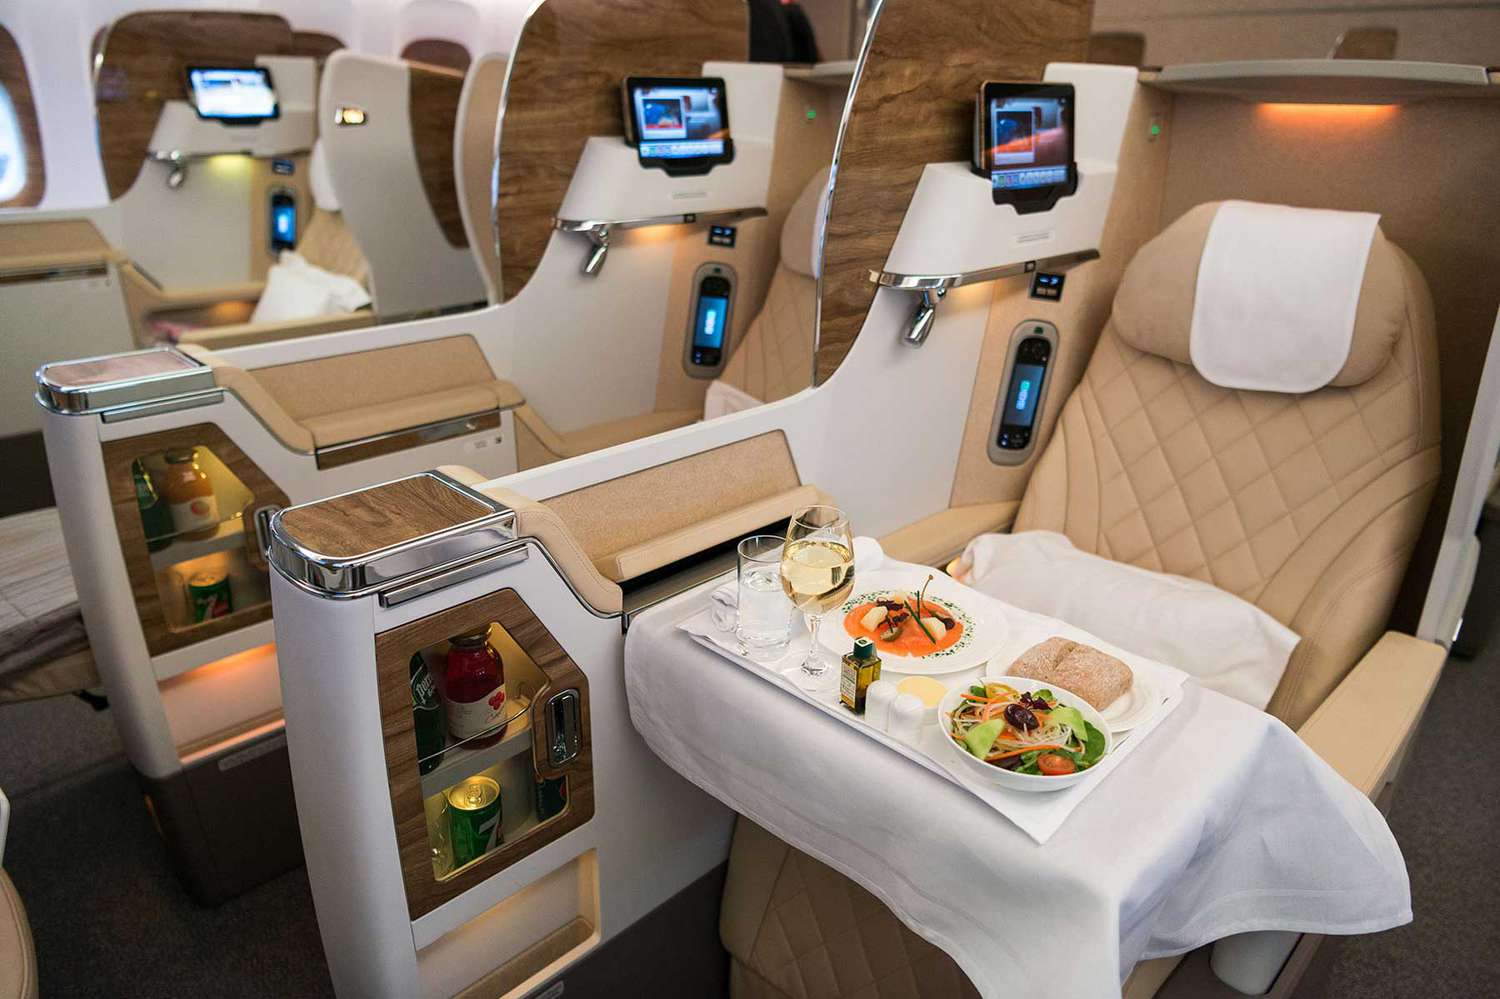 Cheap Business Class Tickets with Emirates